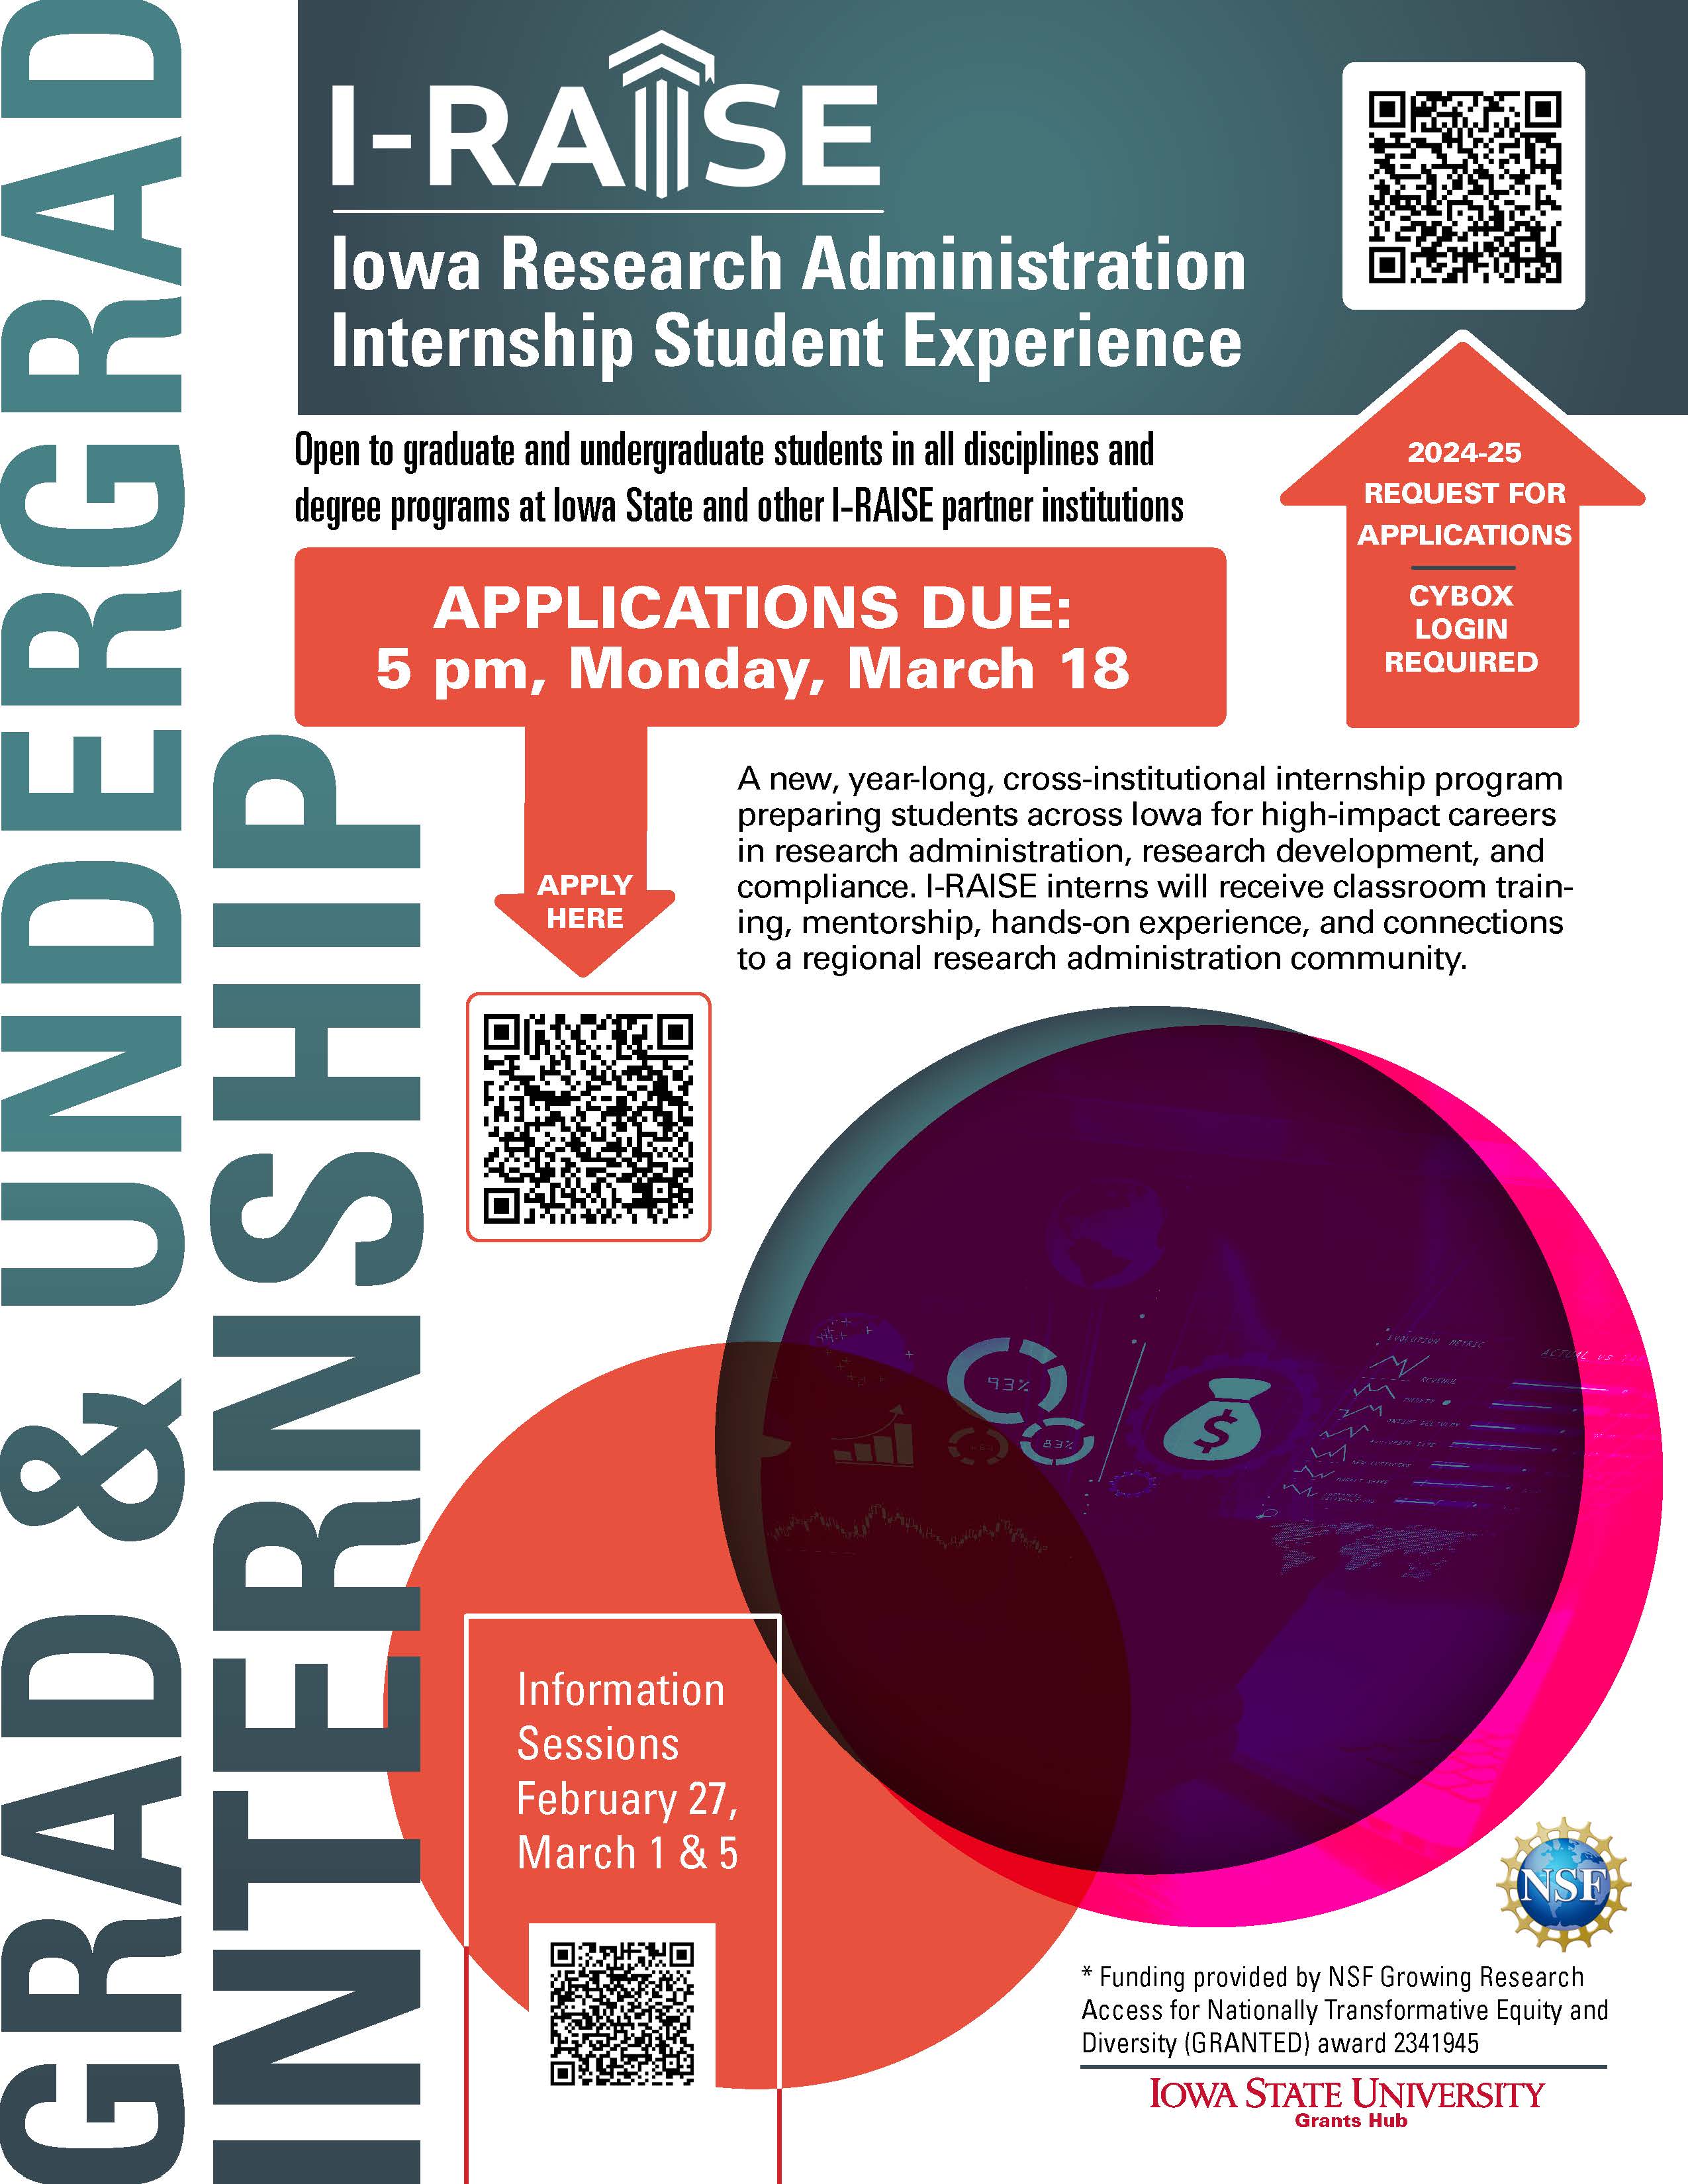 Iowa Research Administration Internship Student Experience